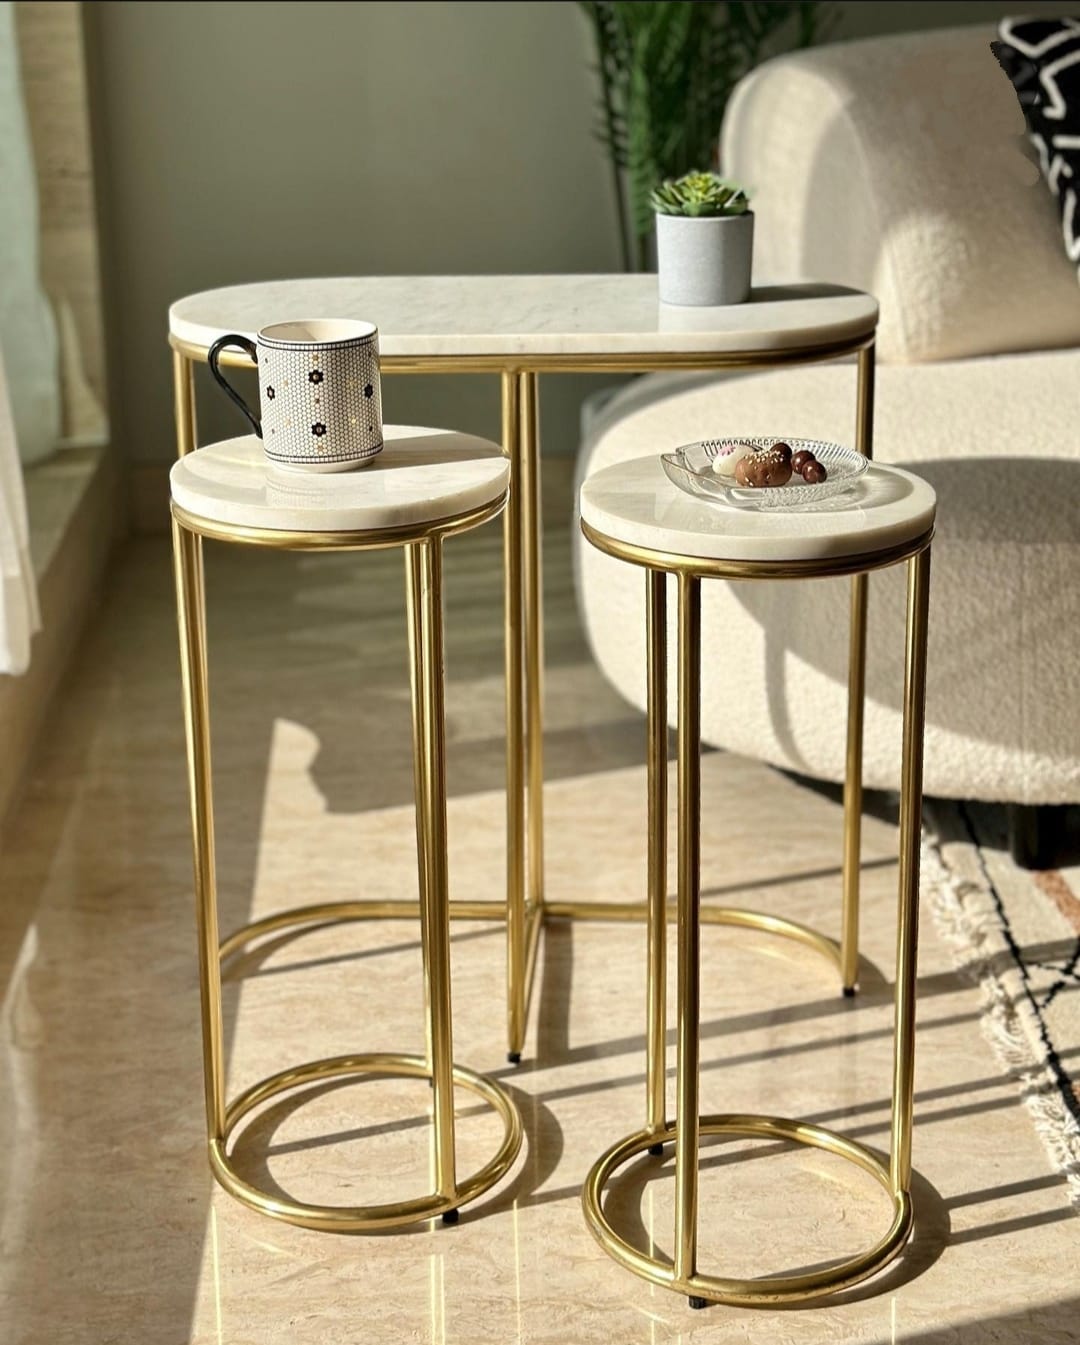 Unique Design Side Table With stools Combo